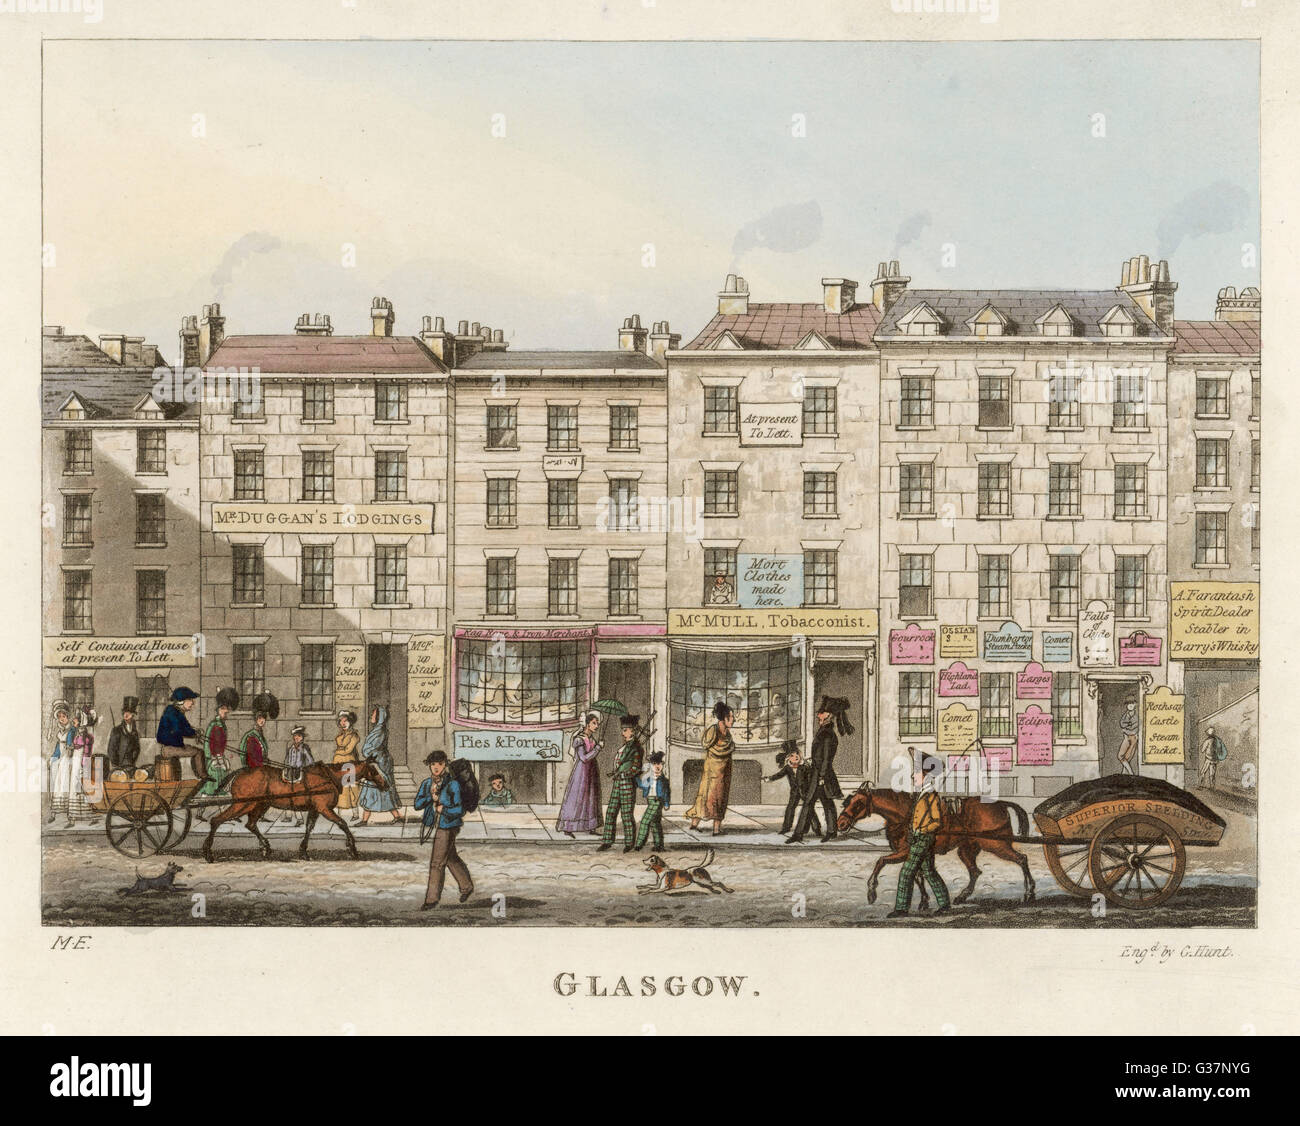 Street Scene In Glasgow In The Early 19th Century With Shops And